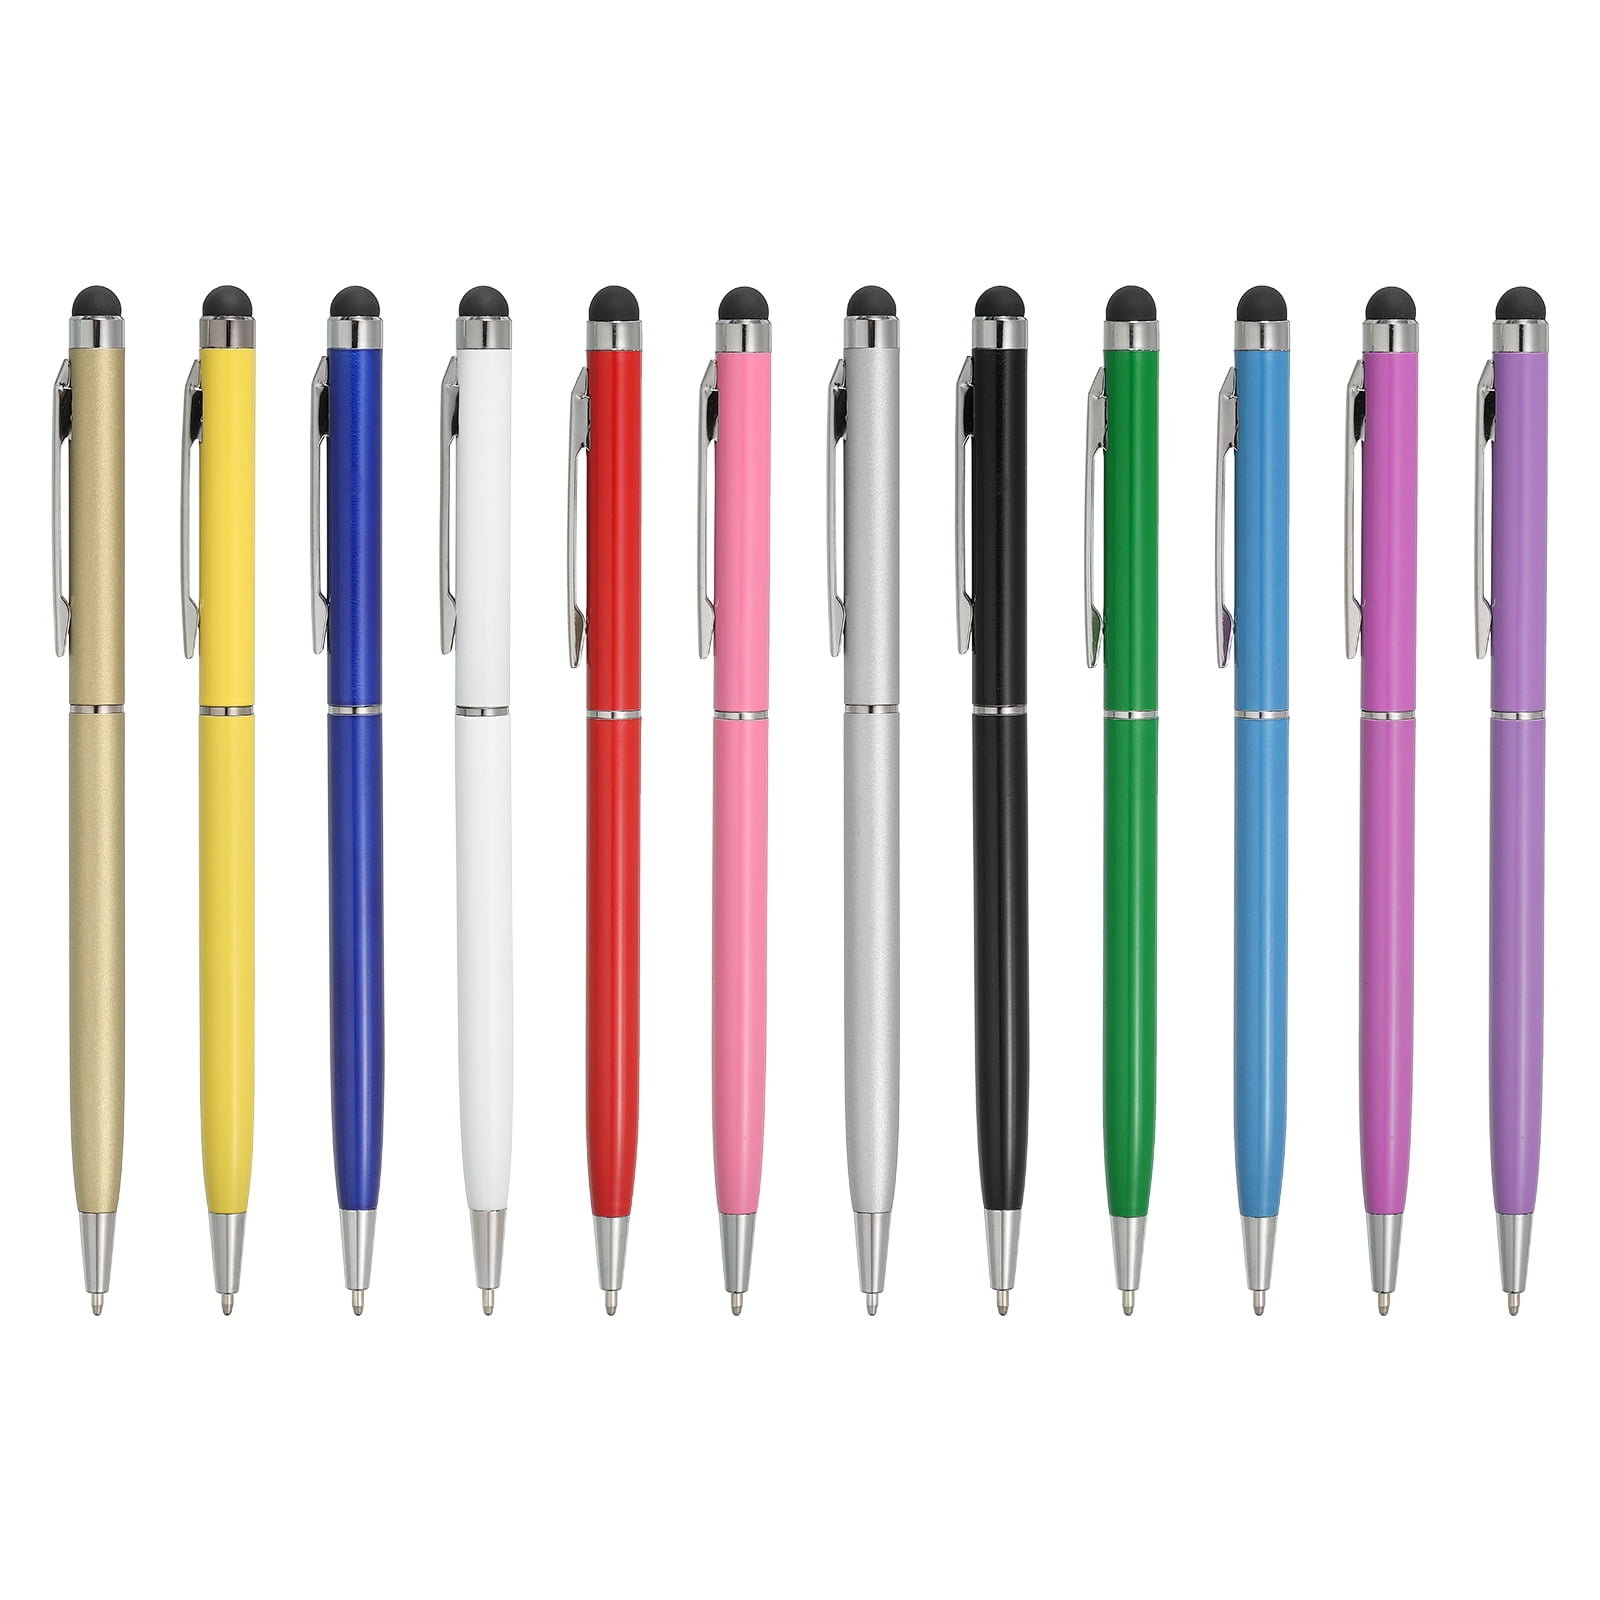 Stylus Pen for Touch Screens, Fine Point Smooth Writing Pens, Personalized Colorful Pens Bulk, Black Ink 1.0 mm Journaling Pen, Cute Pens Office